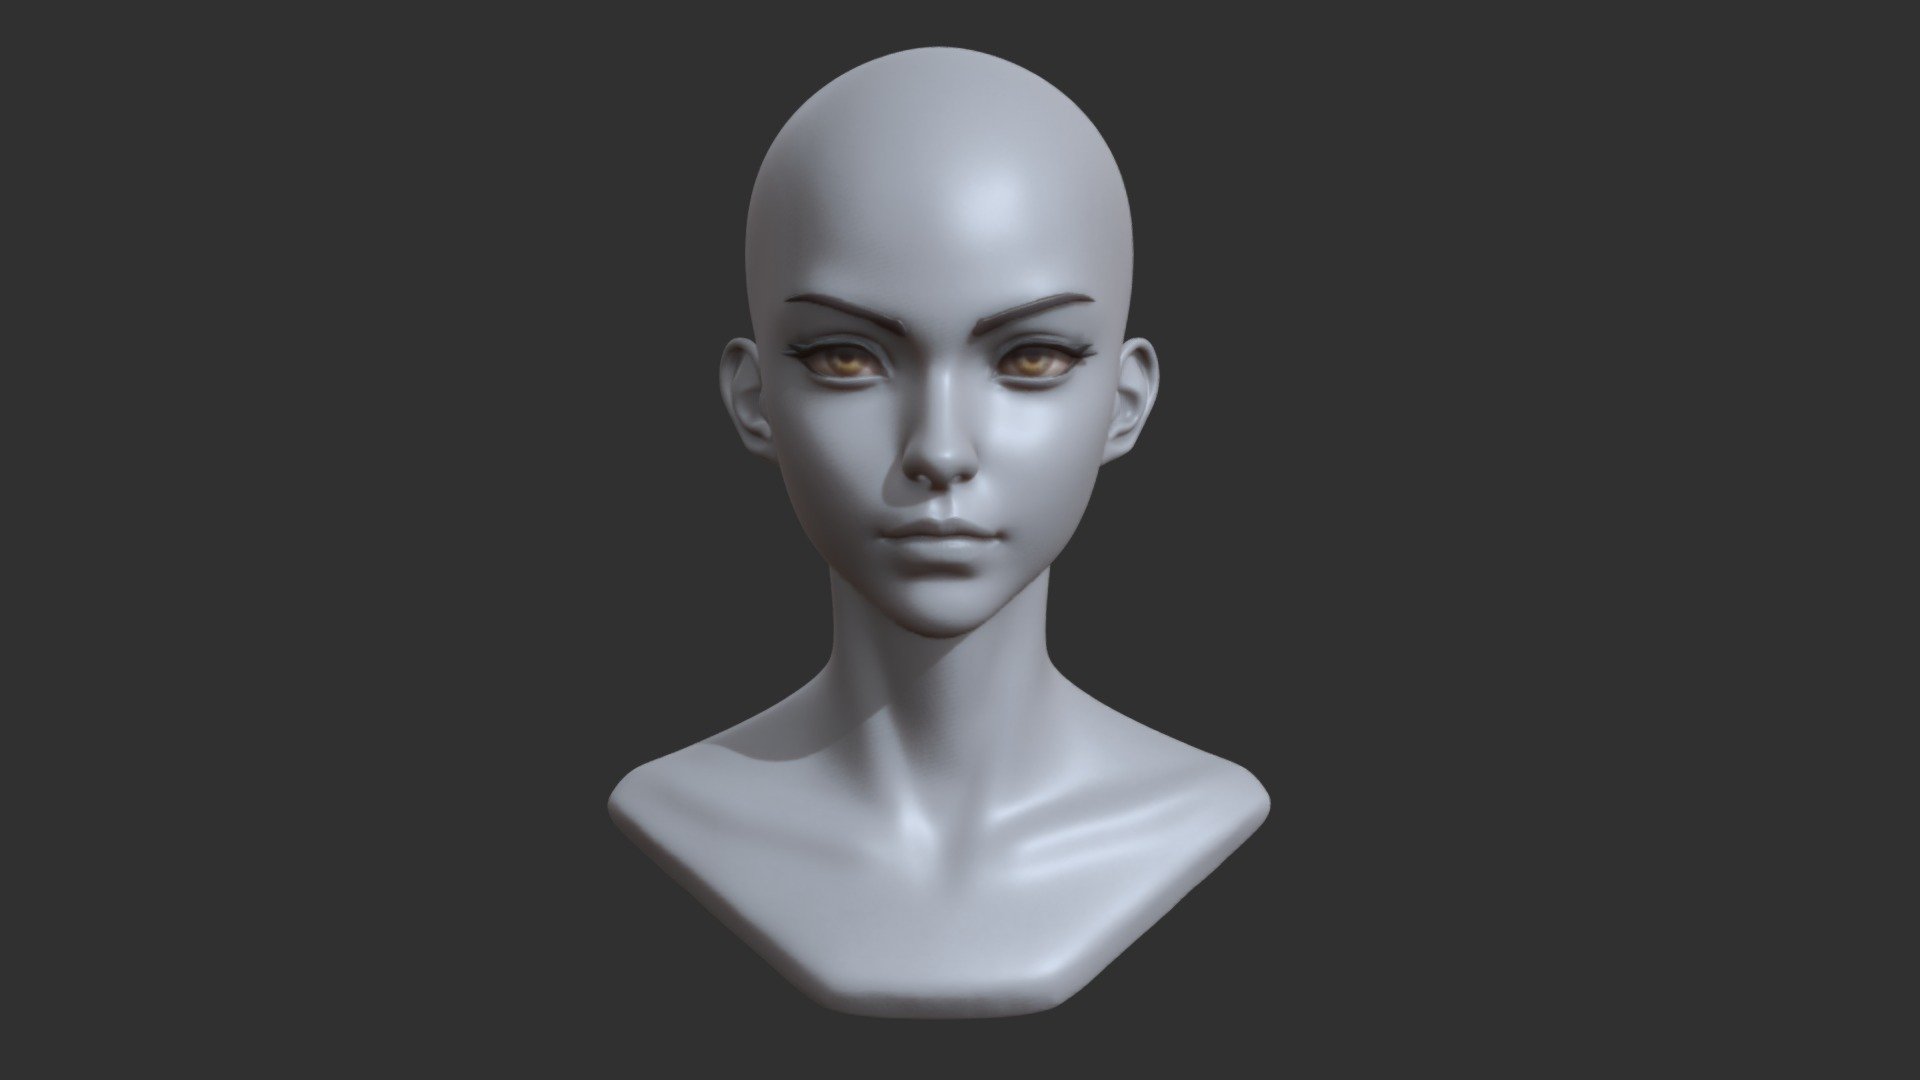 for the better part of 4 years ive been trying to refine and practice stylized faces with anime type features. Im liking more and more these types of faces that remind me of Gun-m Anime or Alita Battle Angel. 

Now you can use it to study! Enjoy! - Stylized Anime Female Head - Download Free 3D model by Rodesqa 3d model